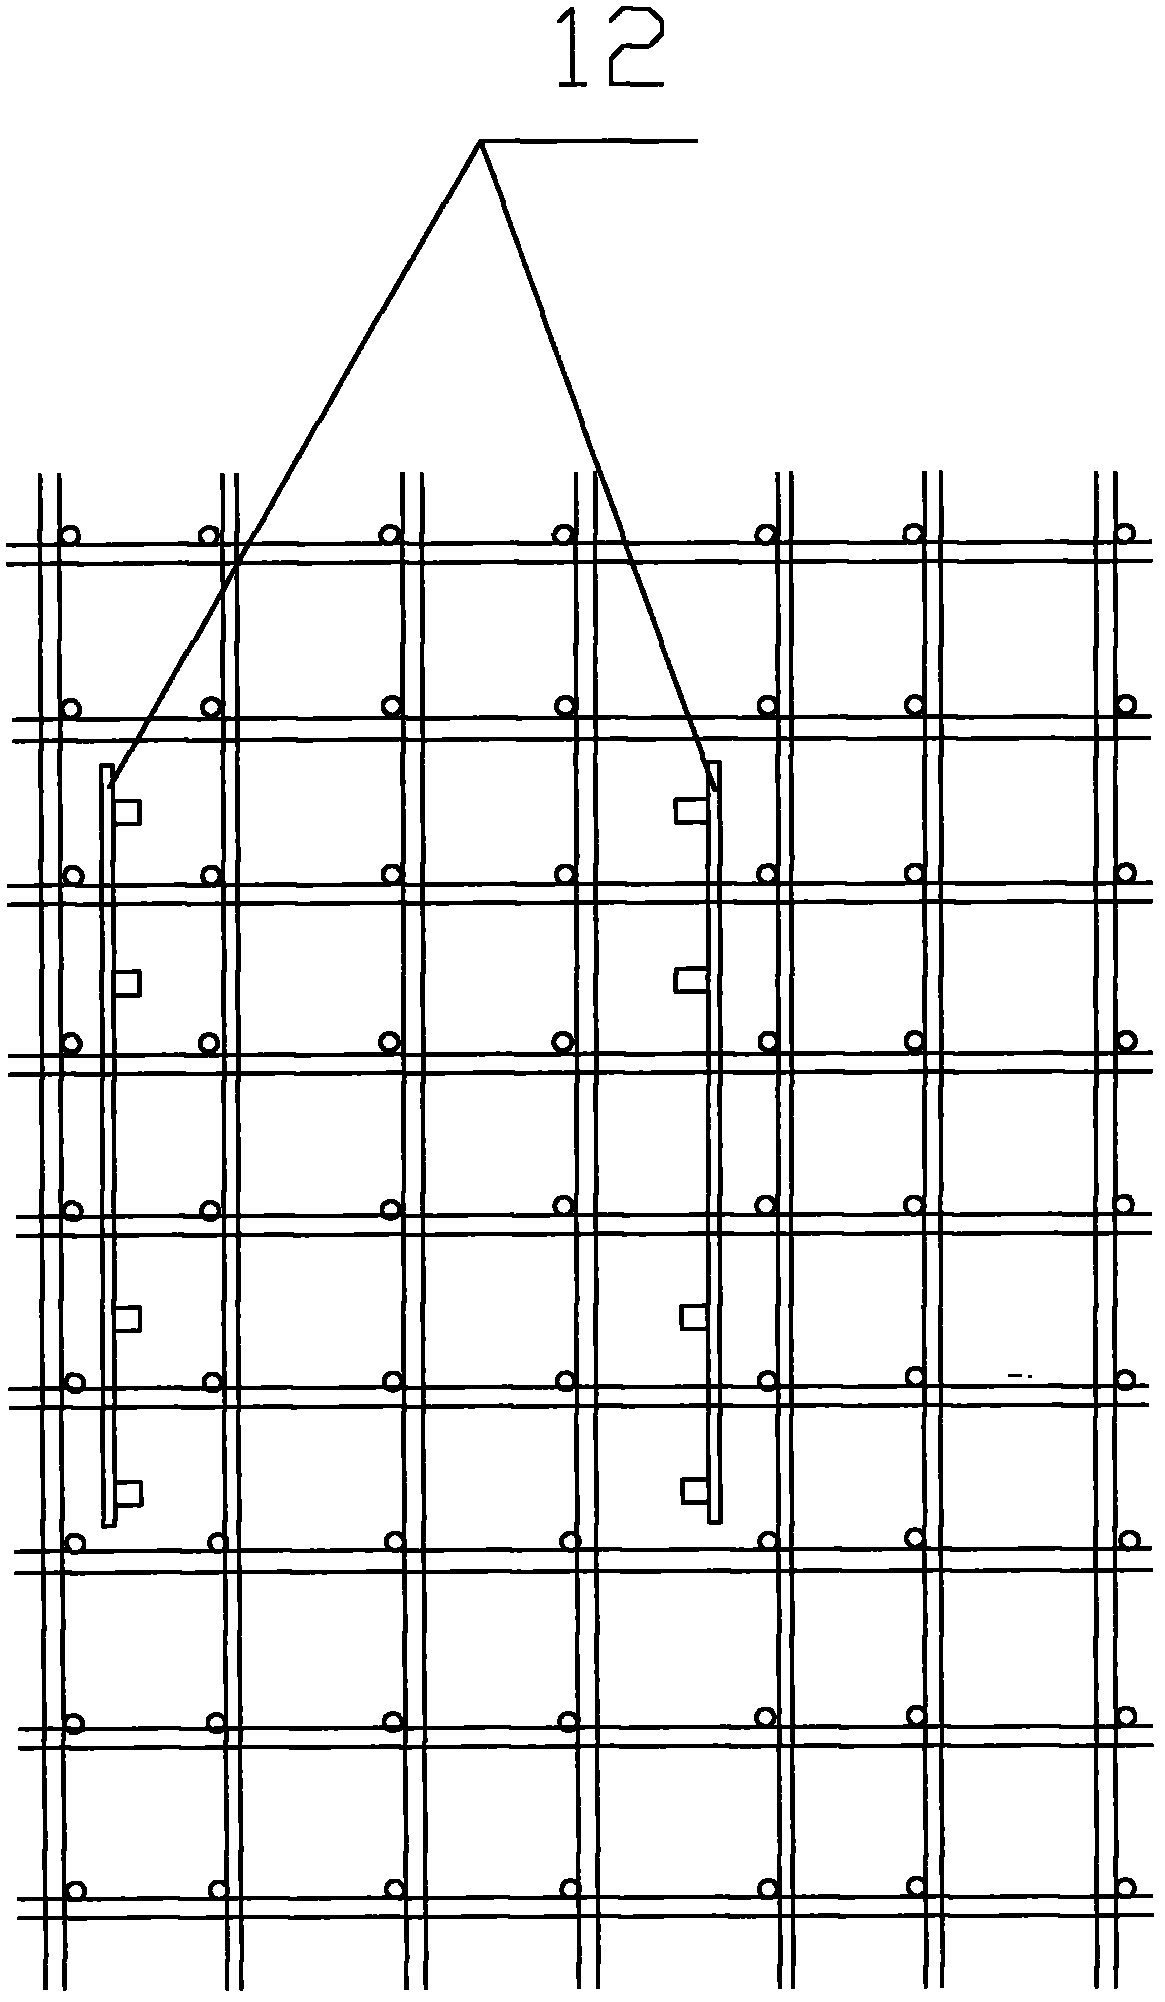 Method for increasing wall connecting piece and improving and determining bearing capacity of support frame